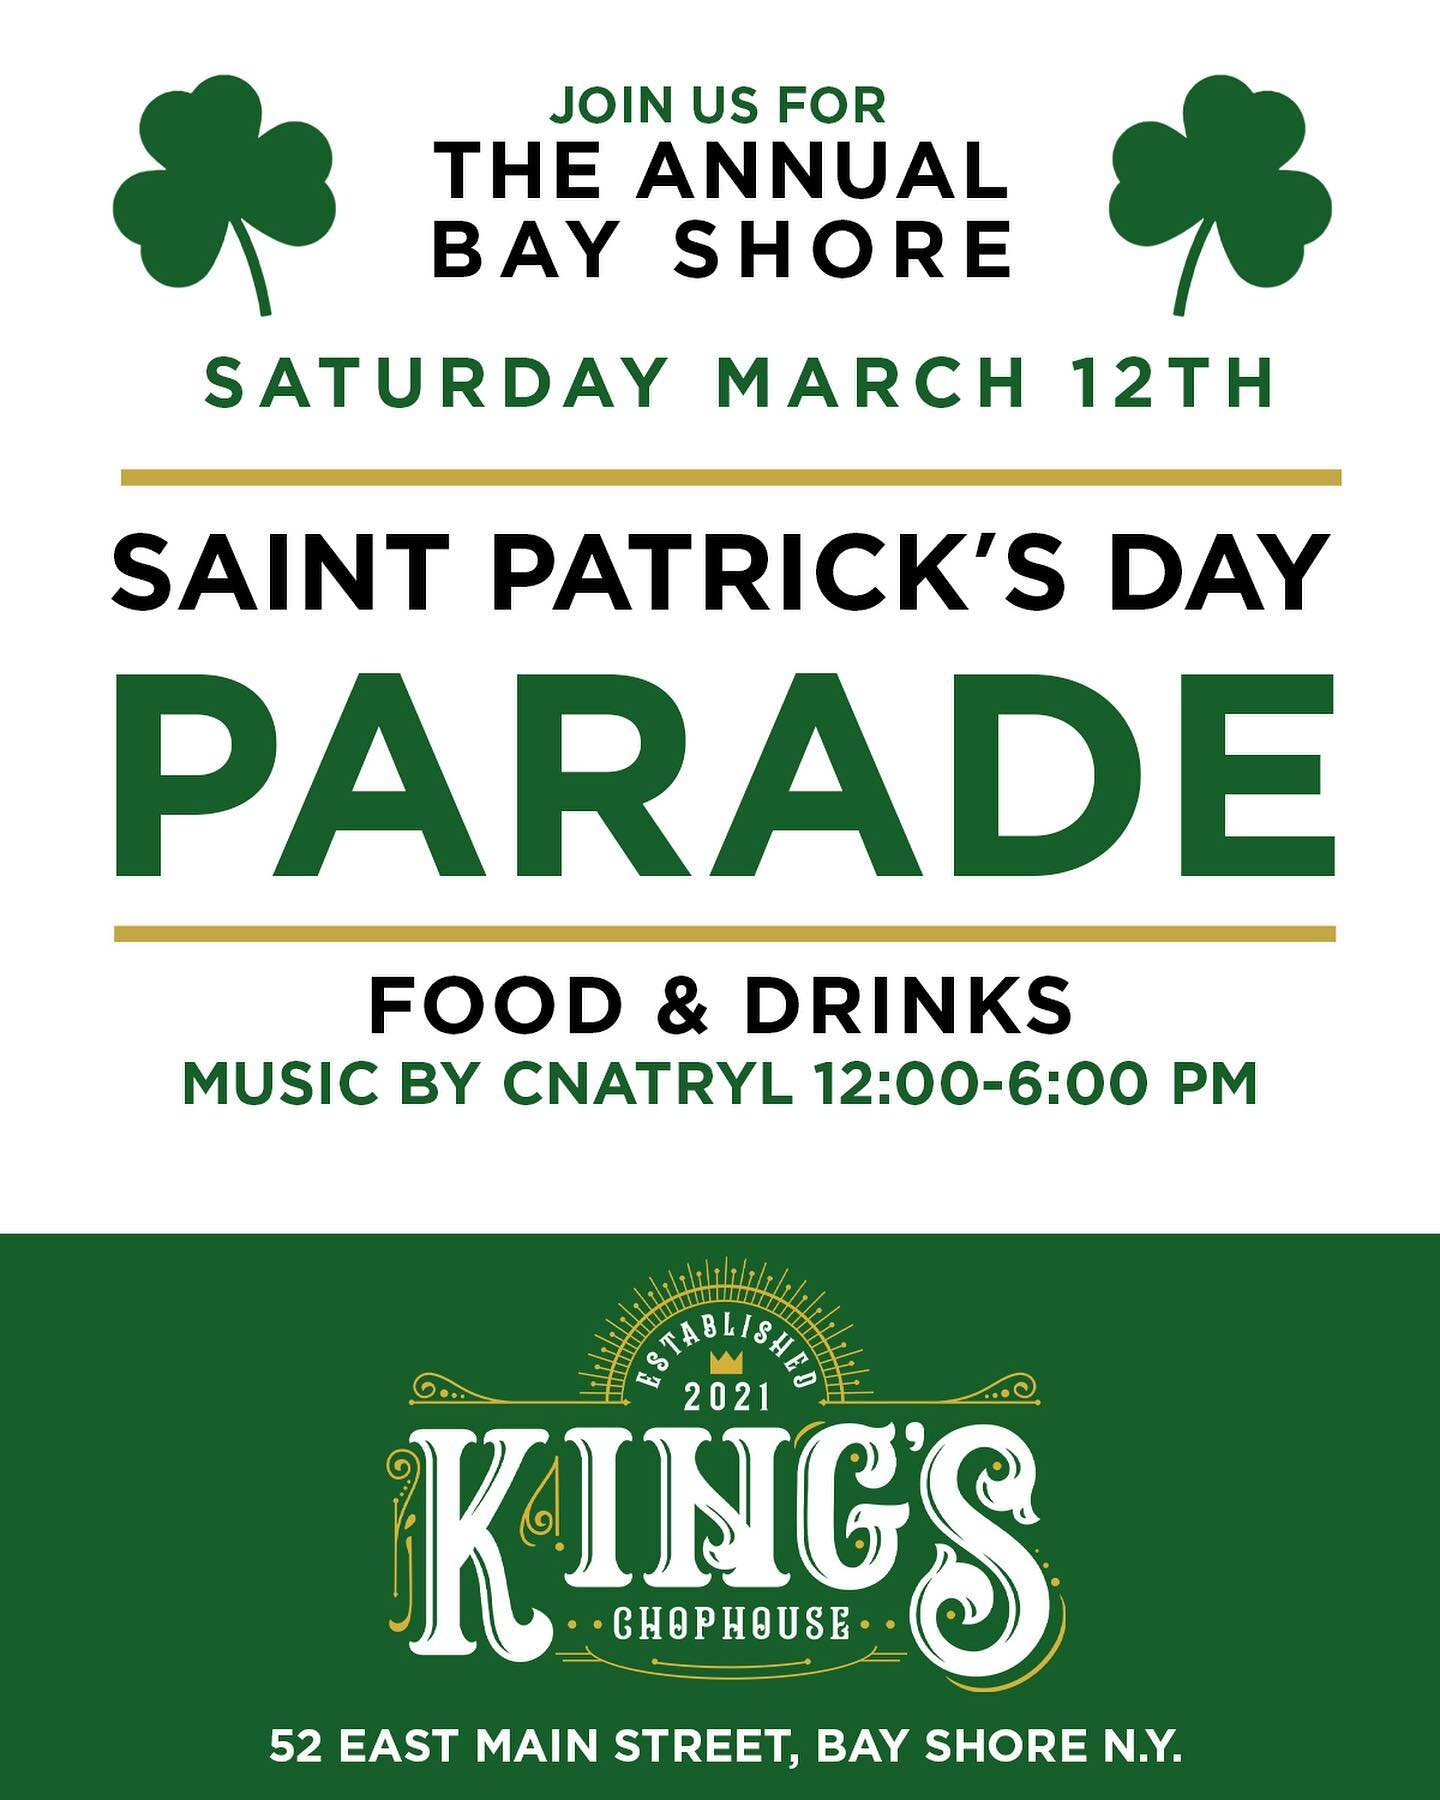 It&rsquo;s that time of the year! Join us Saturday March 12th for the Bay Shore St. Patrick&rsquo;s Day Parade! We have food and drinks available all day long, as well as music by our very own @cnatryl 12:00-6:00 PM!